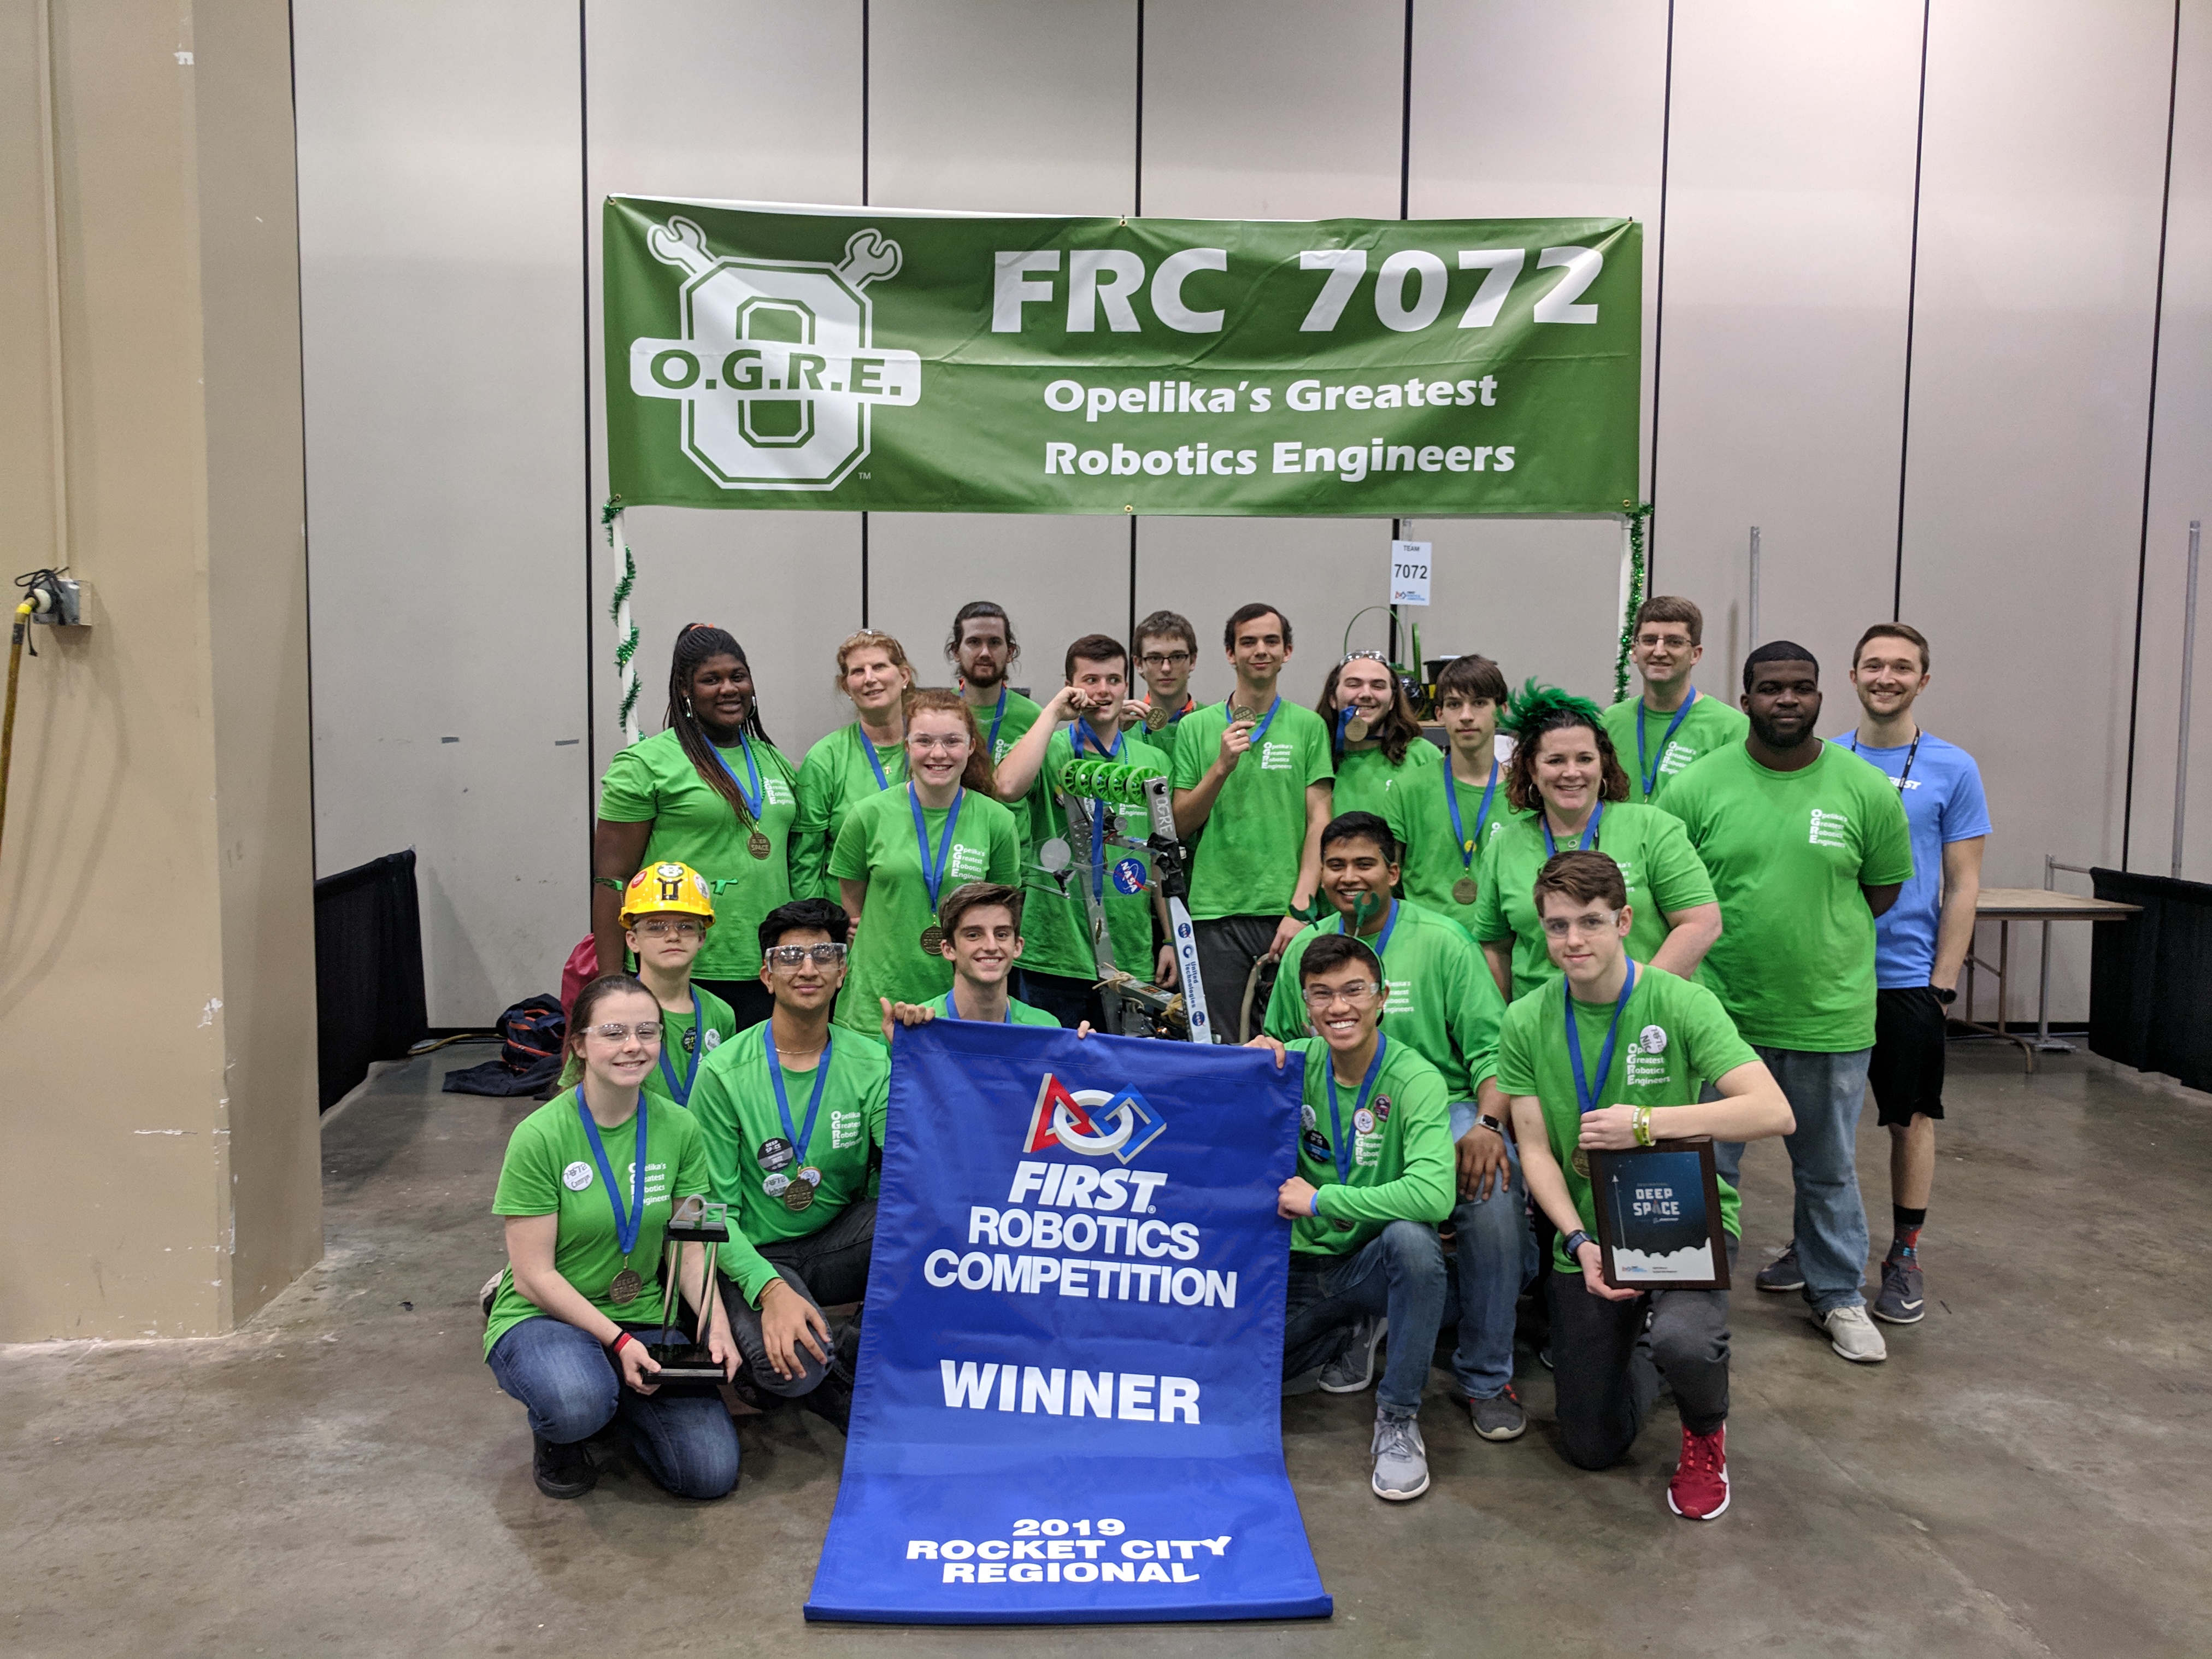 O.G.R.E. to compete at FIRST national robotics competition in Houston this week